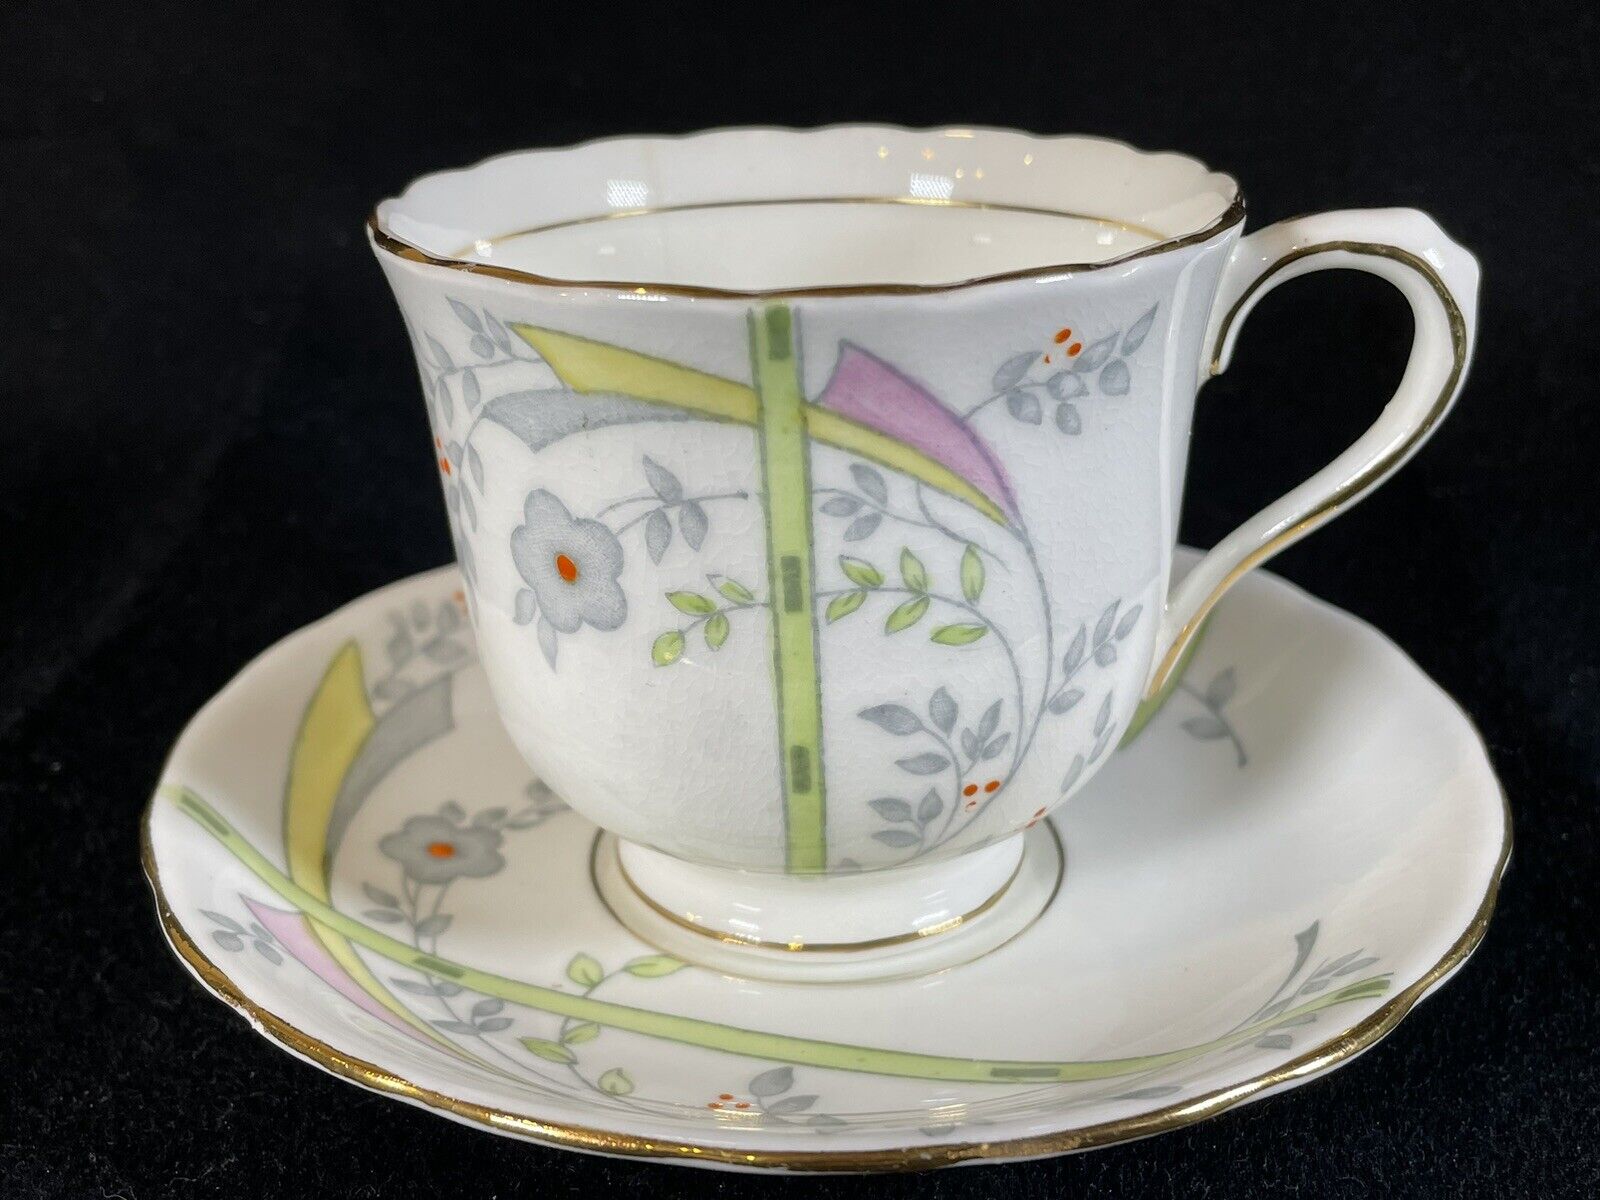 Vintage Victoria C&E (Cartwright and Edwards) teacup and saucer 1930s